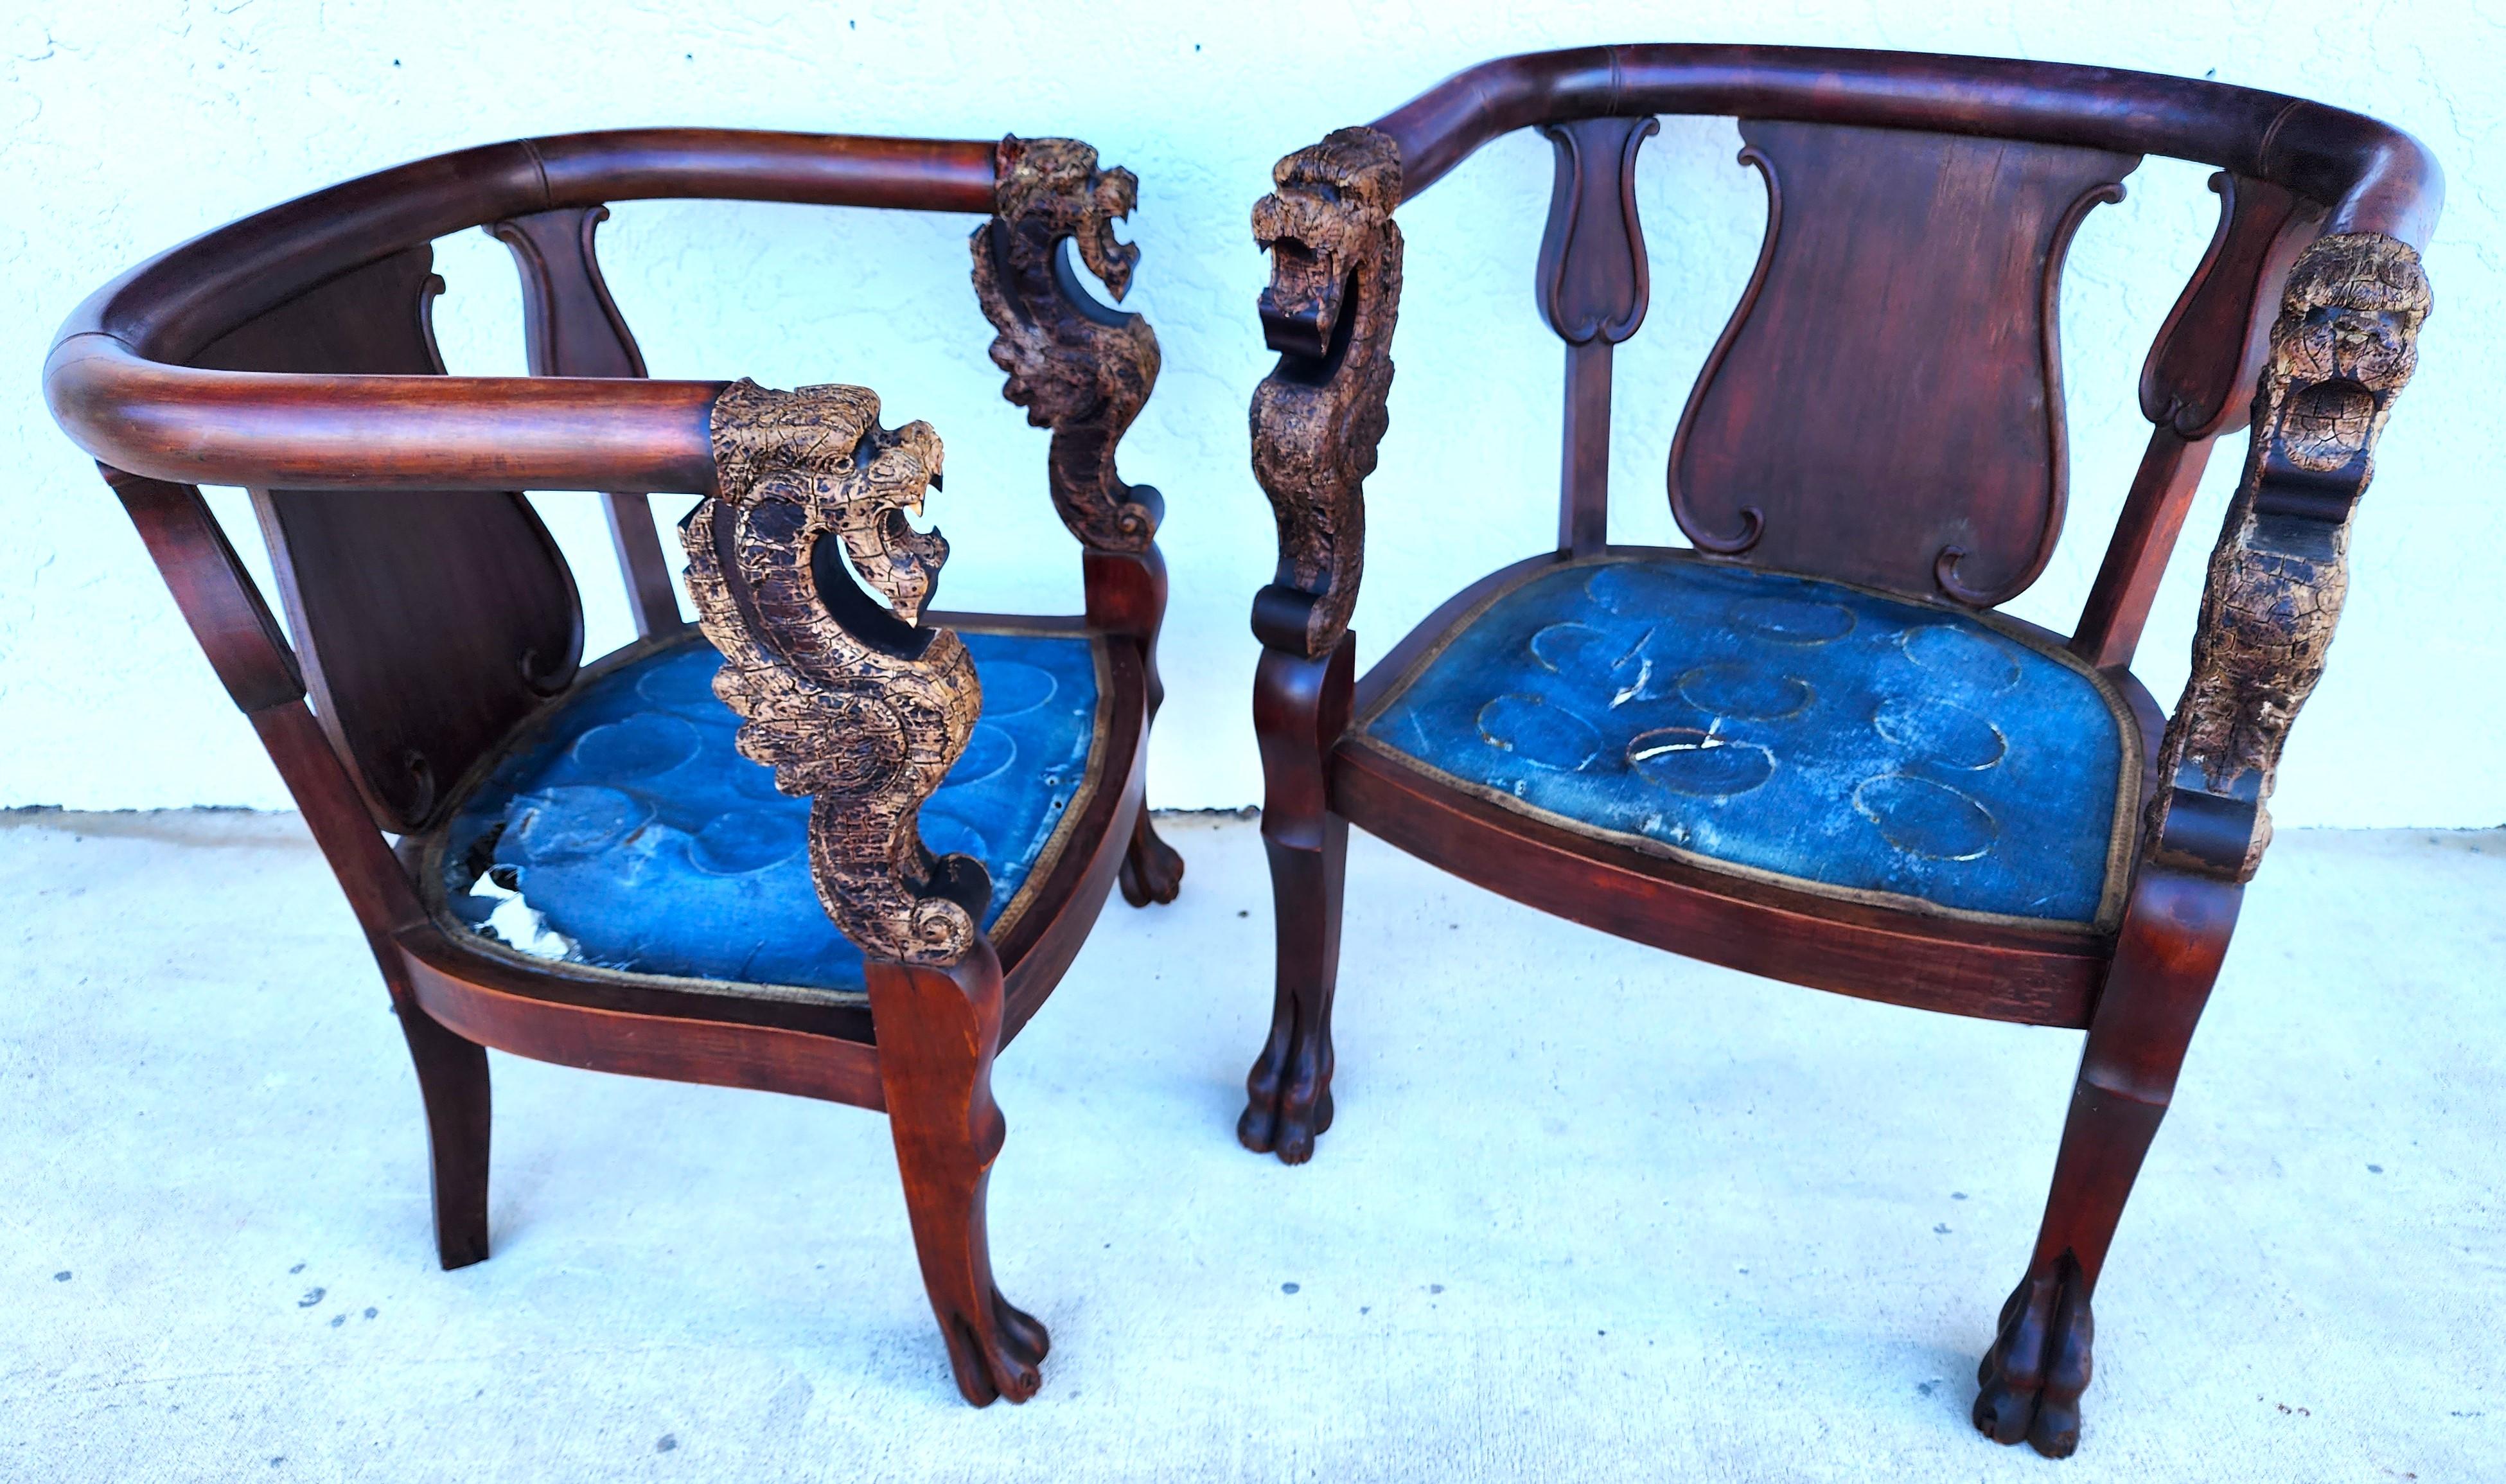 For FULL item description click on CONTINUE READING at the bottom of this page.

Offering One Of Our Recent Palm Beach Estate Fine Furniture Acquisitions Of A
Pair of Antique Chinese Carved Dragon His & Her Chairs

Approximate Measurements in